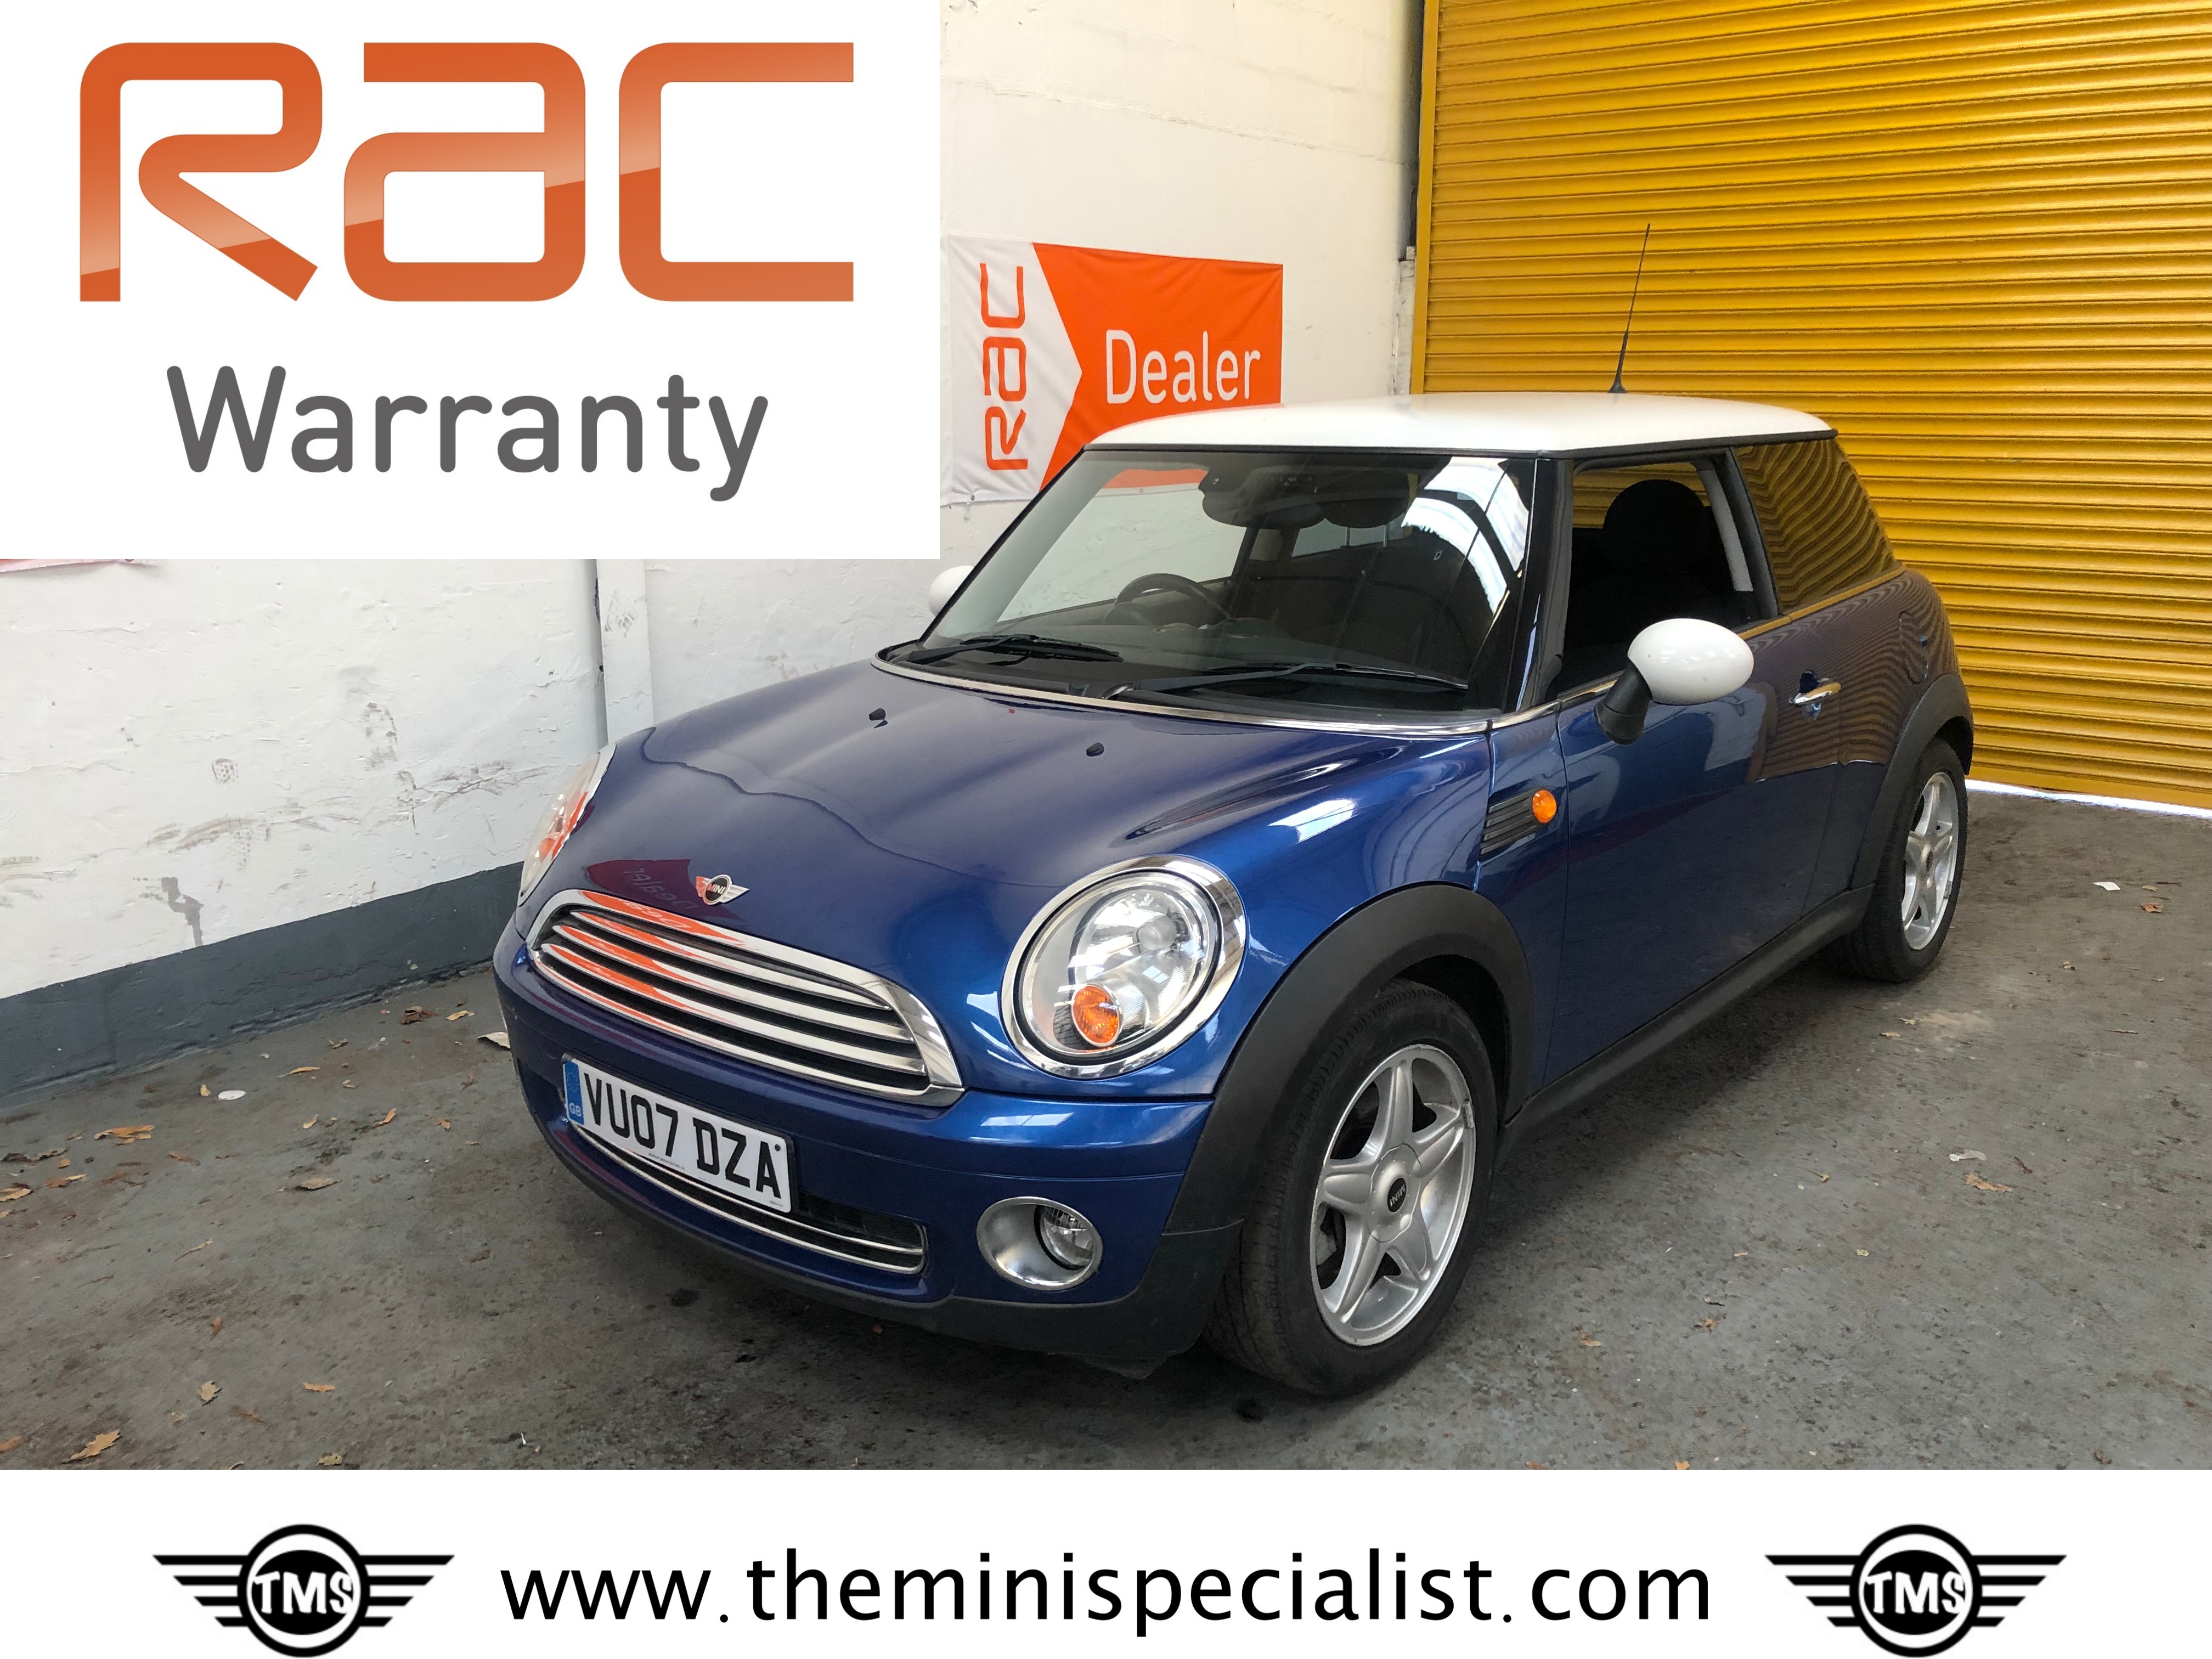 SOLD - 2007 MINI Cooper Automatic in Lightning blue - SOLD - The